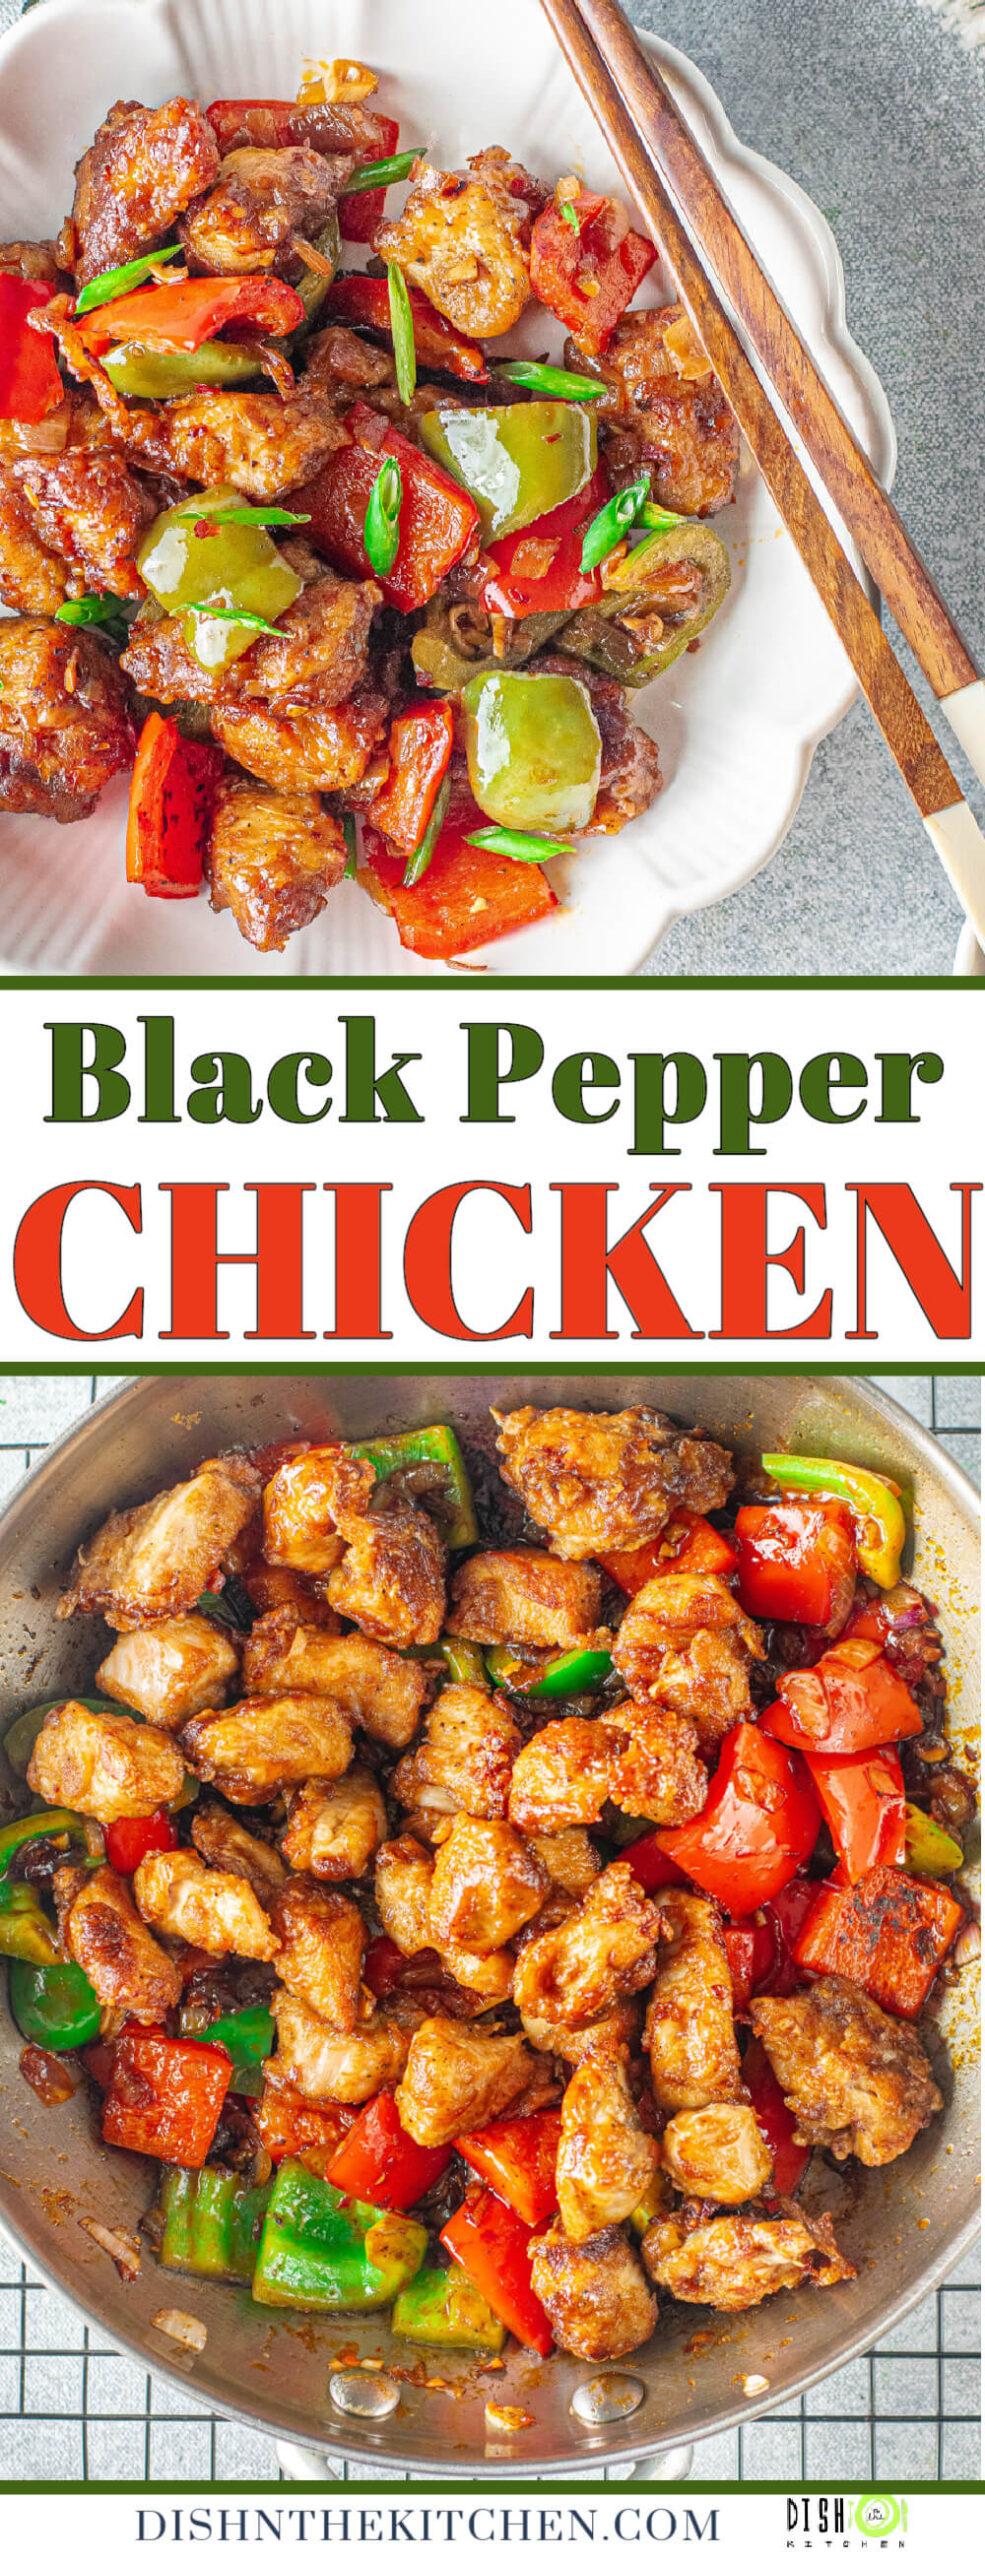 Pinterest image of a colourful Black Pepper Chicken stir fry with vegetables.